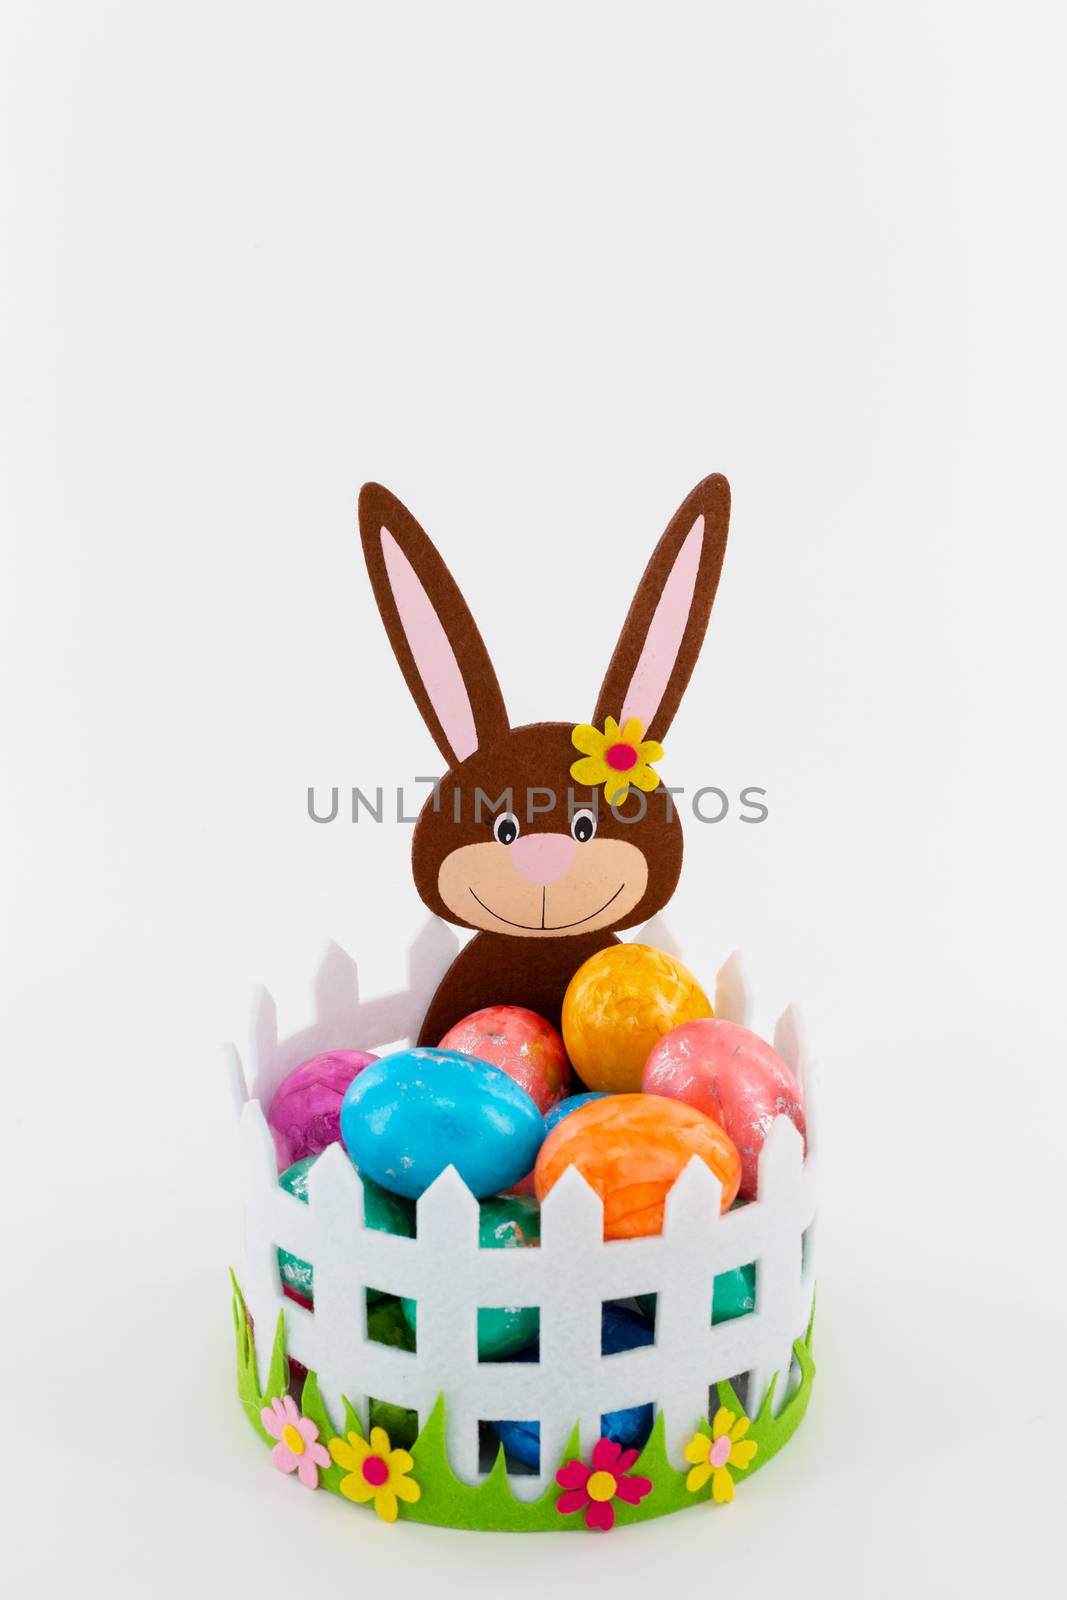 Some Colorful Easter eggs in a basket with an Easter bunny